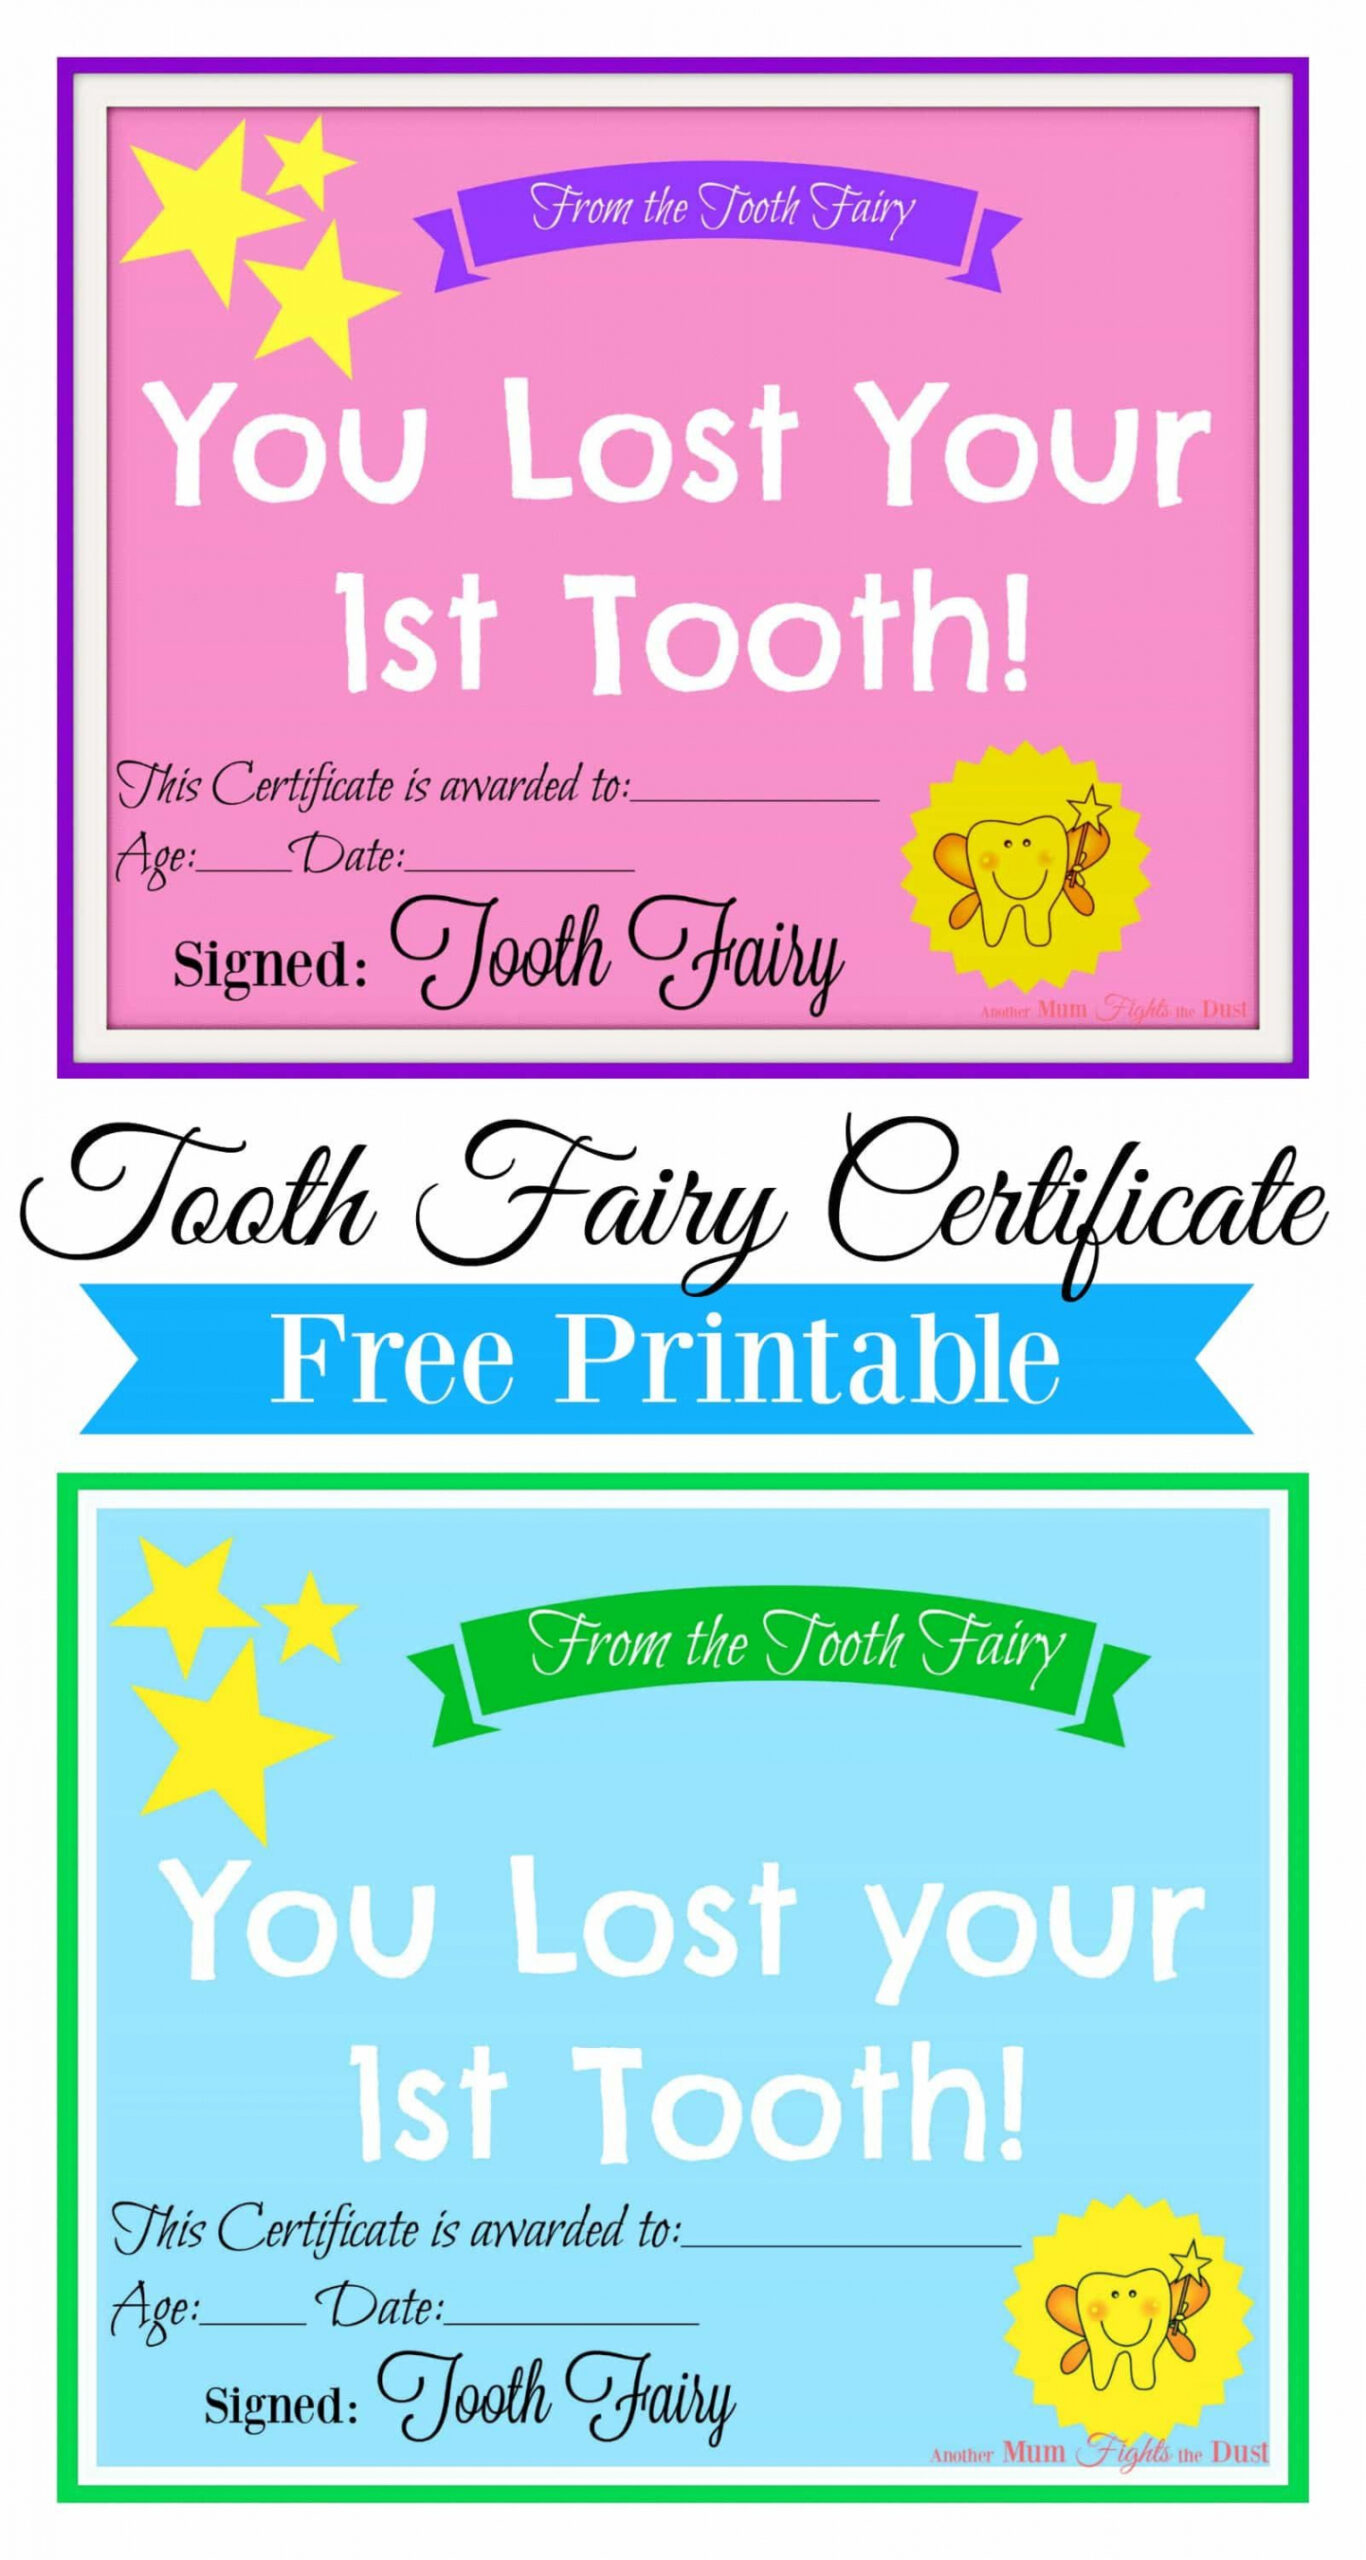 Pin on Tooth Fairy Ideas - FREE Printables - Tooth Fairy Free Printable